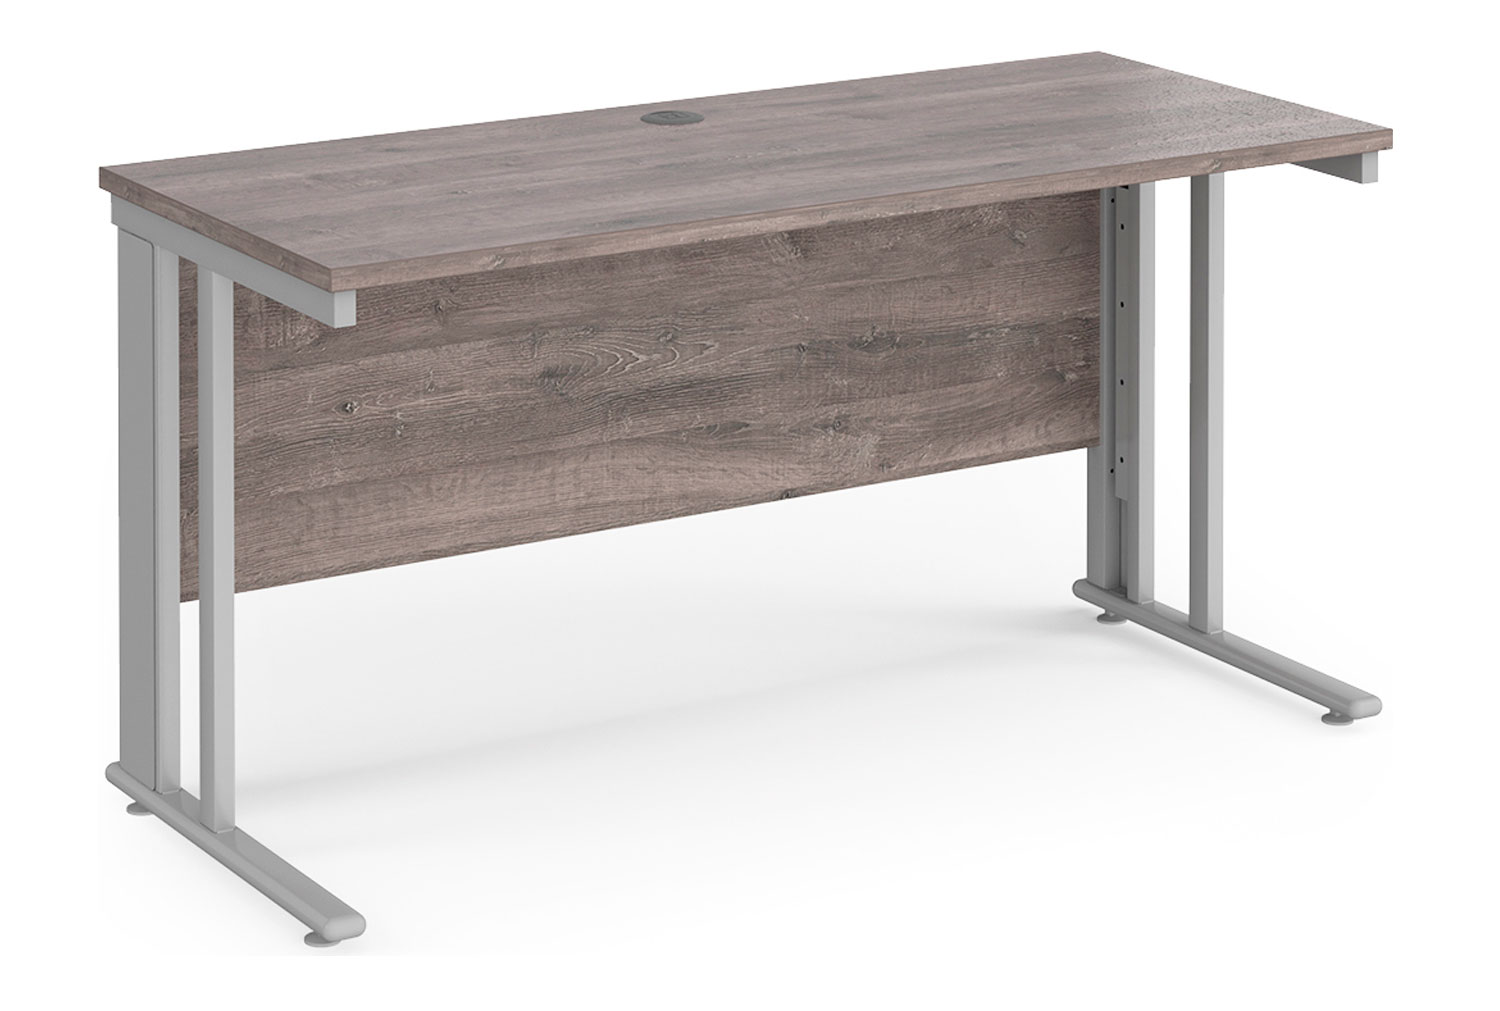 Value Line Deluxe Cable Managed Narrow Rectangular Office Desk (Silver Legs), 140wx60dx73h (cm), Grey Oak